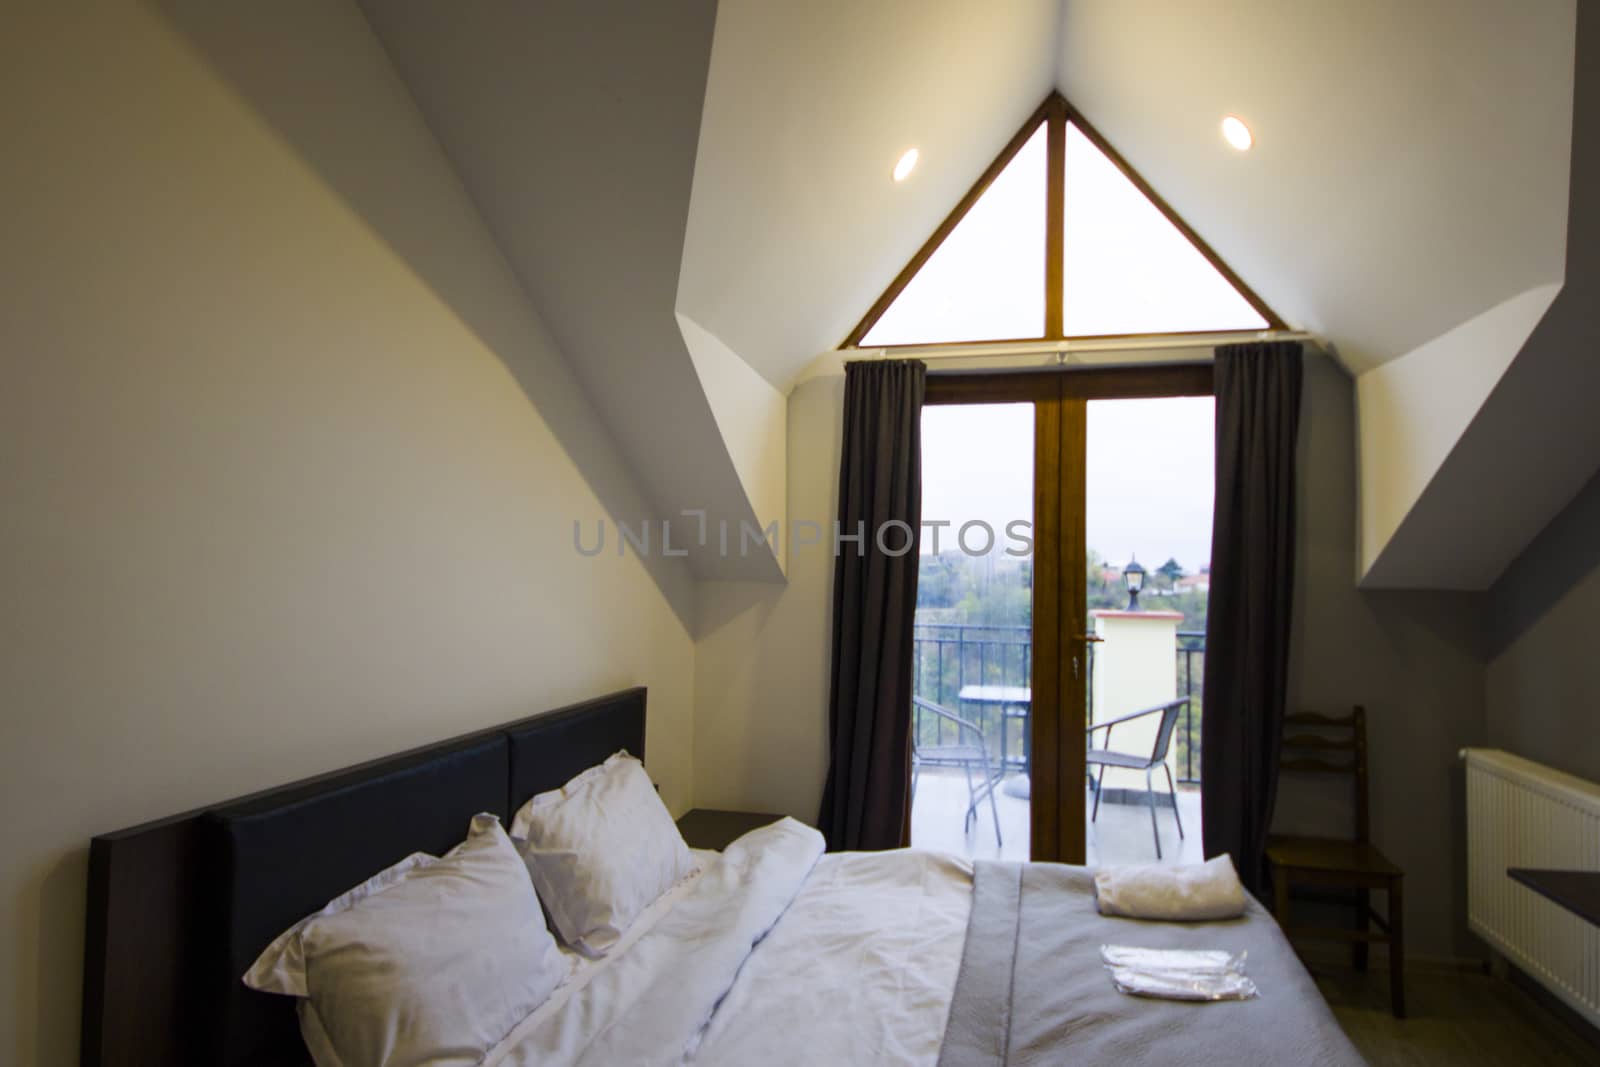 Guest house and hostel room interior, bed and table